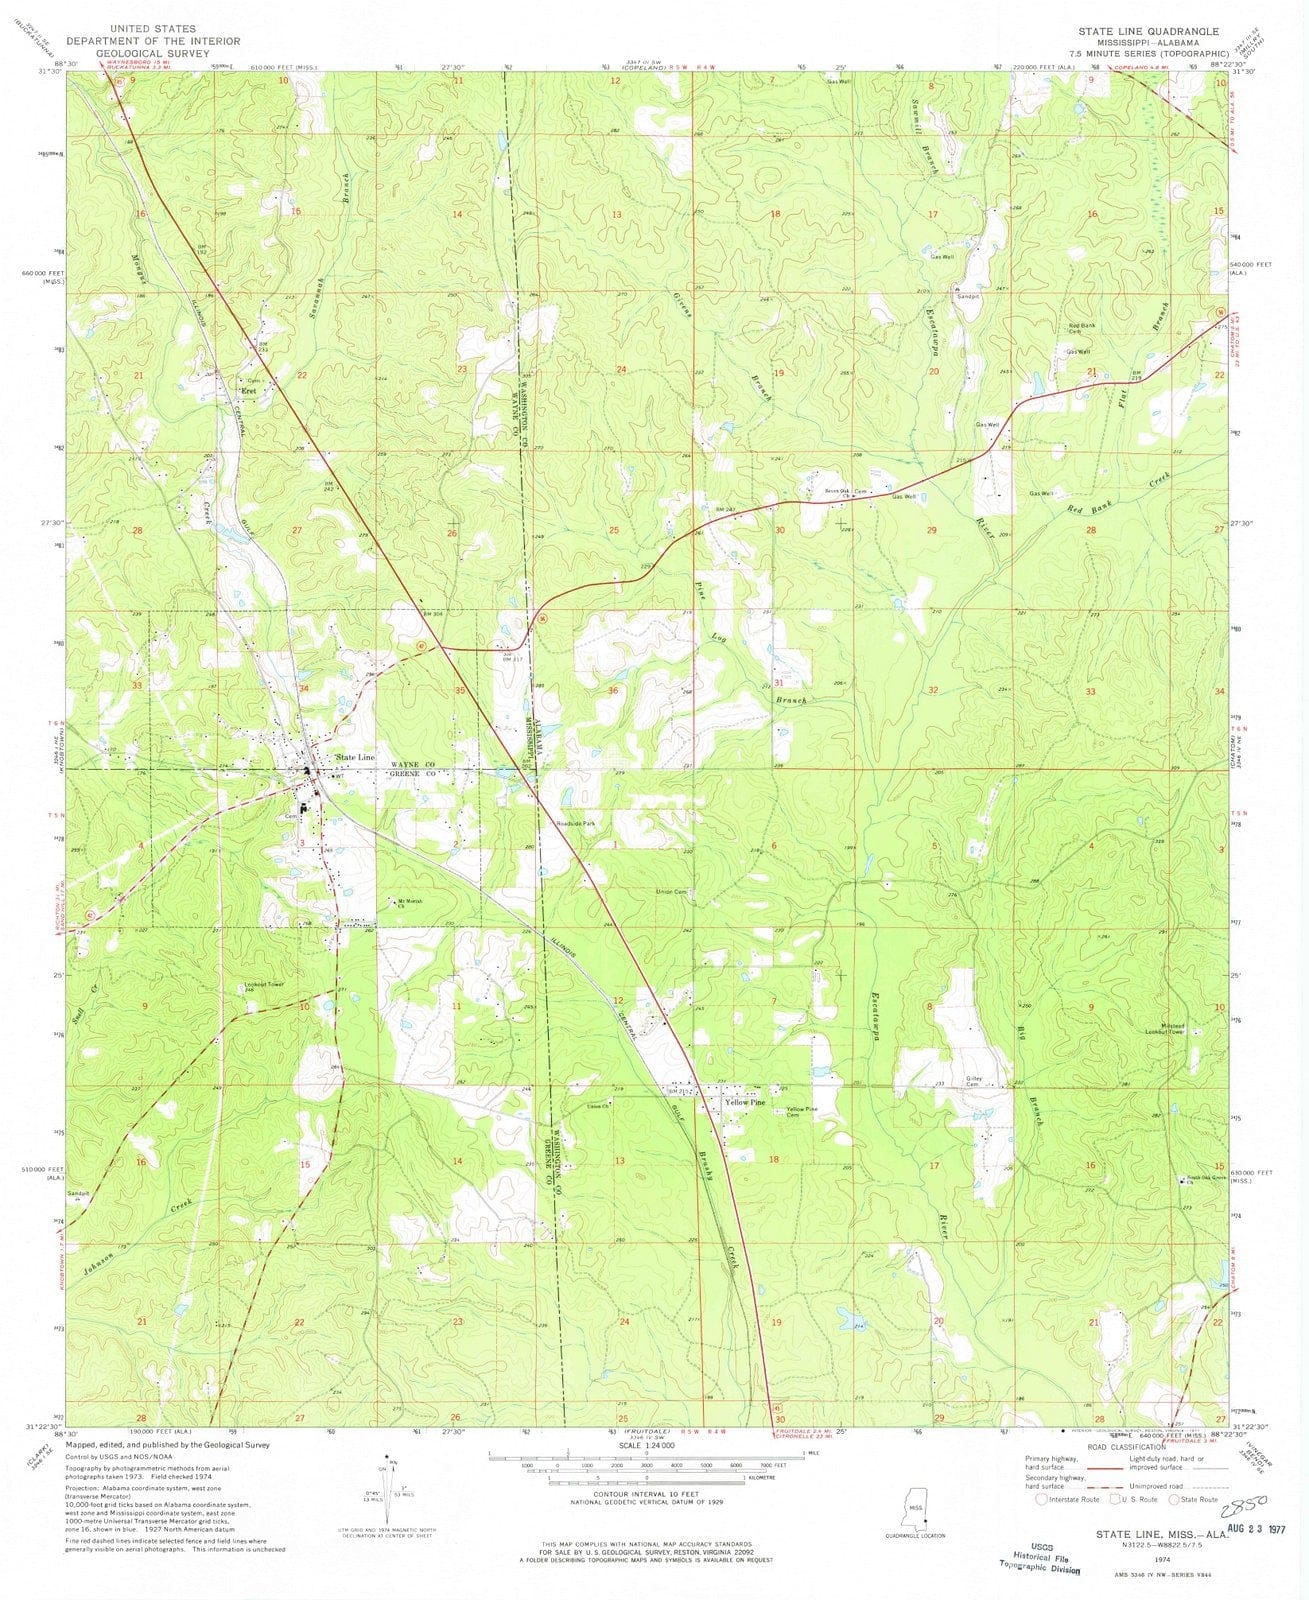 1974 State Line, MS - Mississippi - USGS Topographic Map